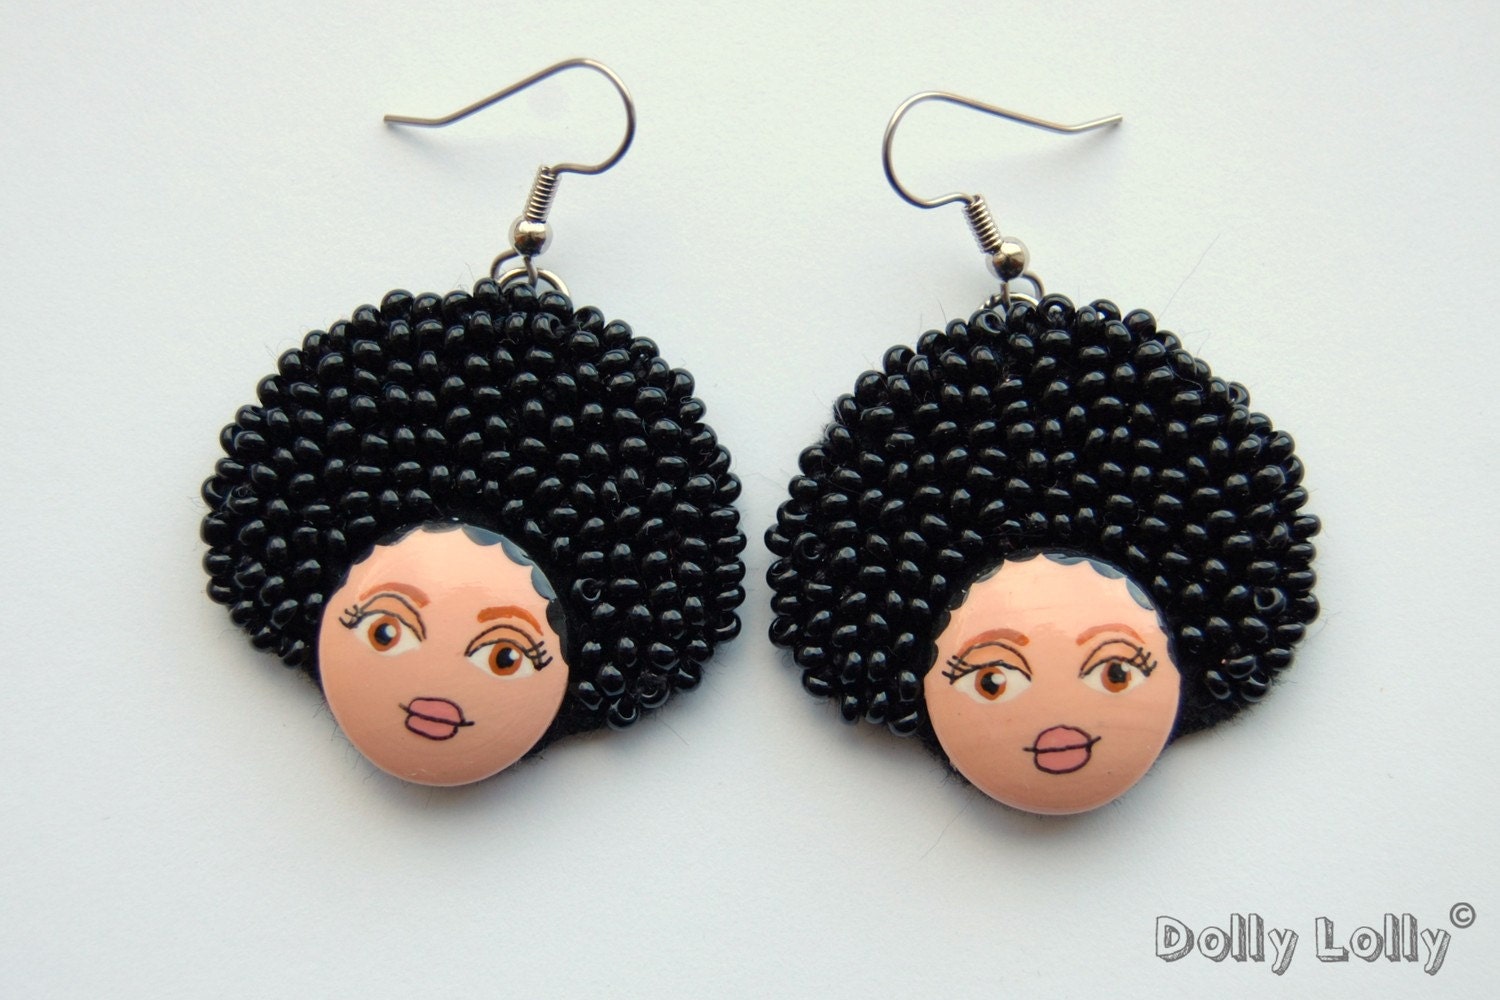 Hand painted and Hand embroidered earrings